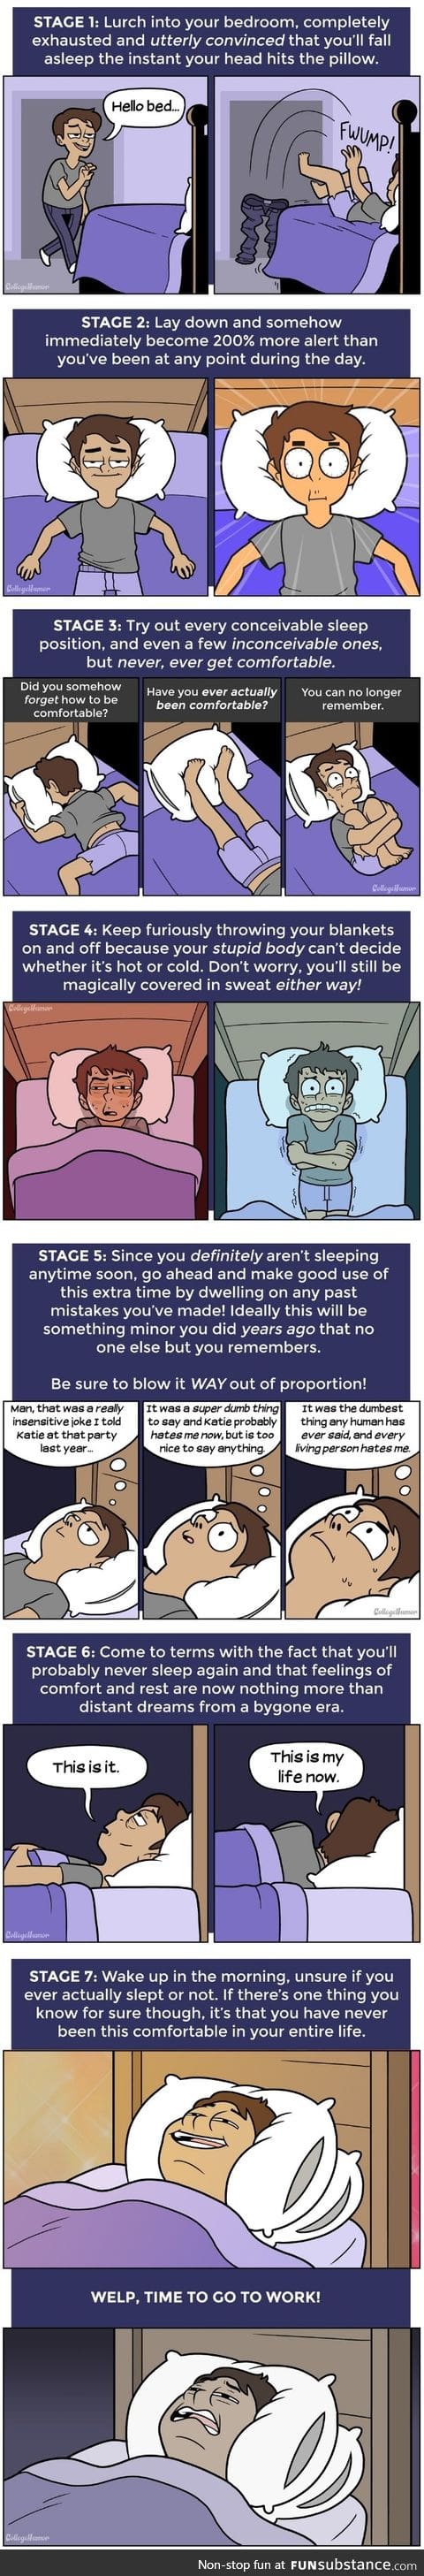 The 7 Stages of Not Sleeping at Night